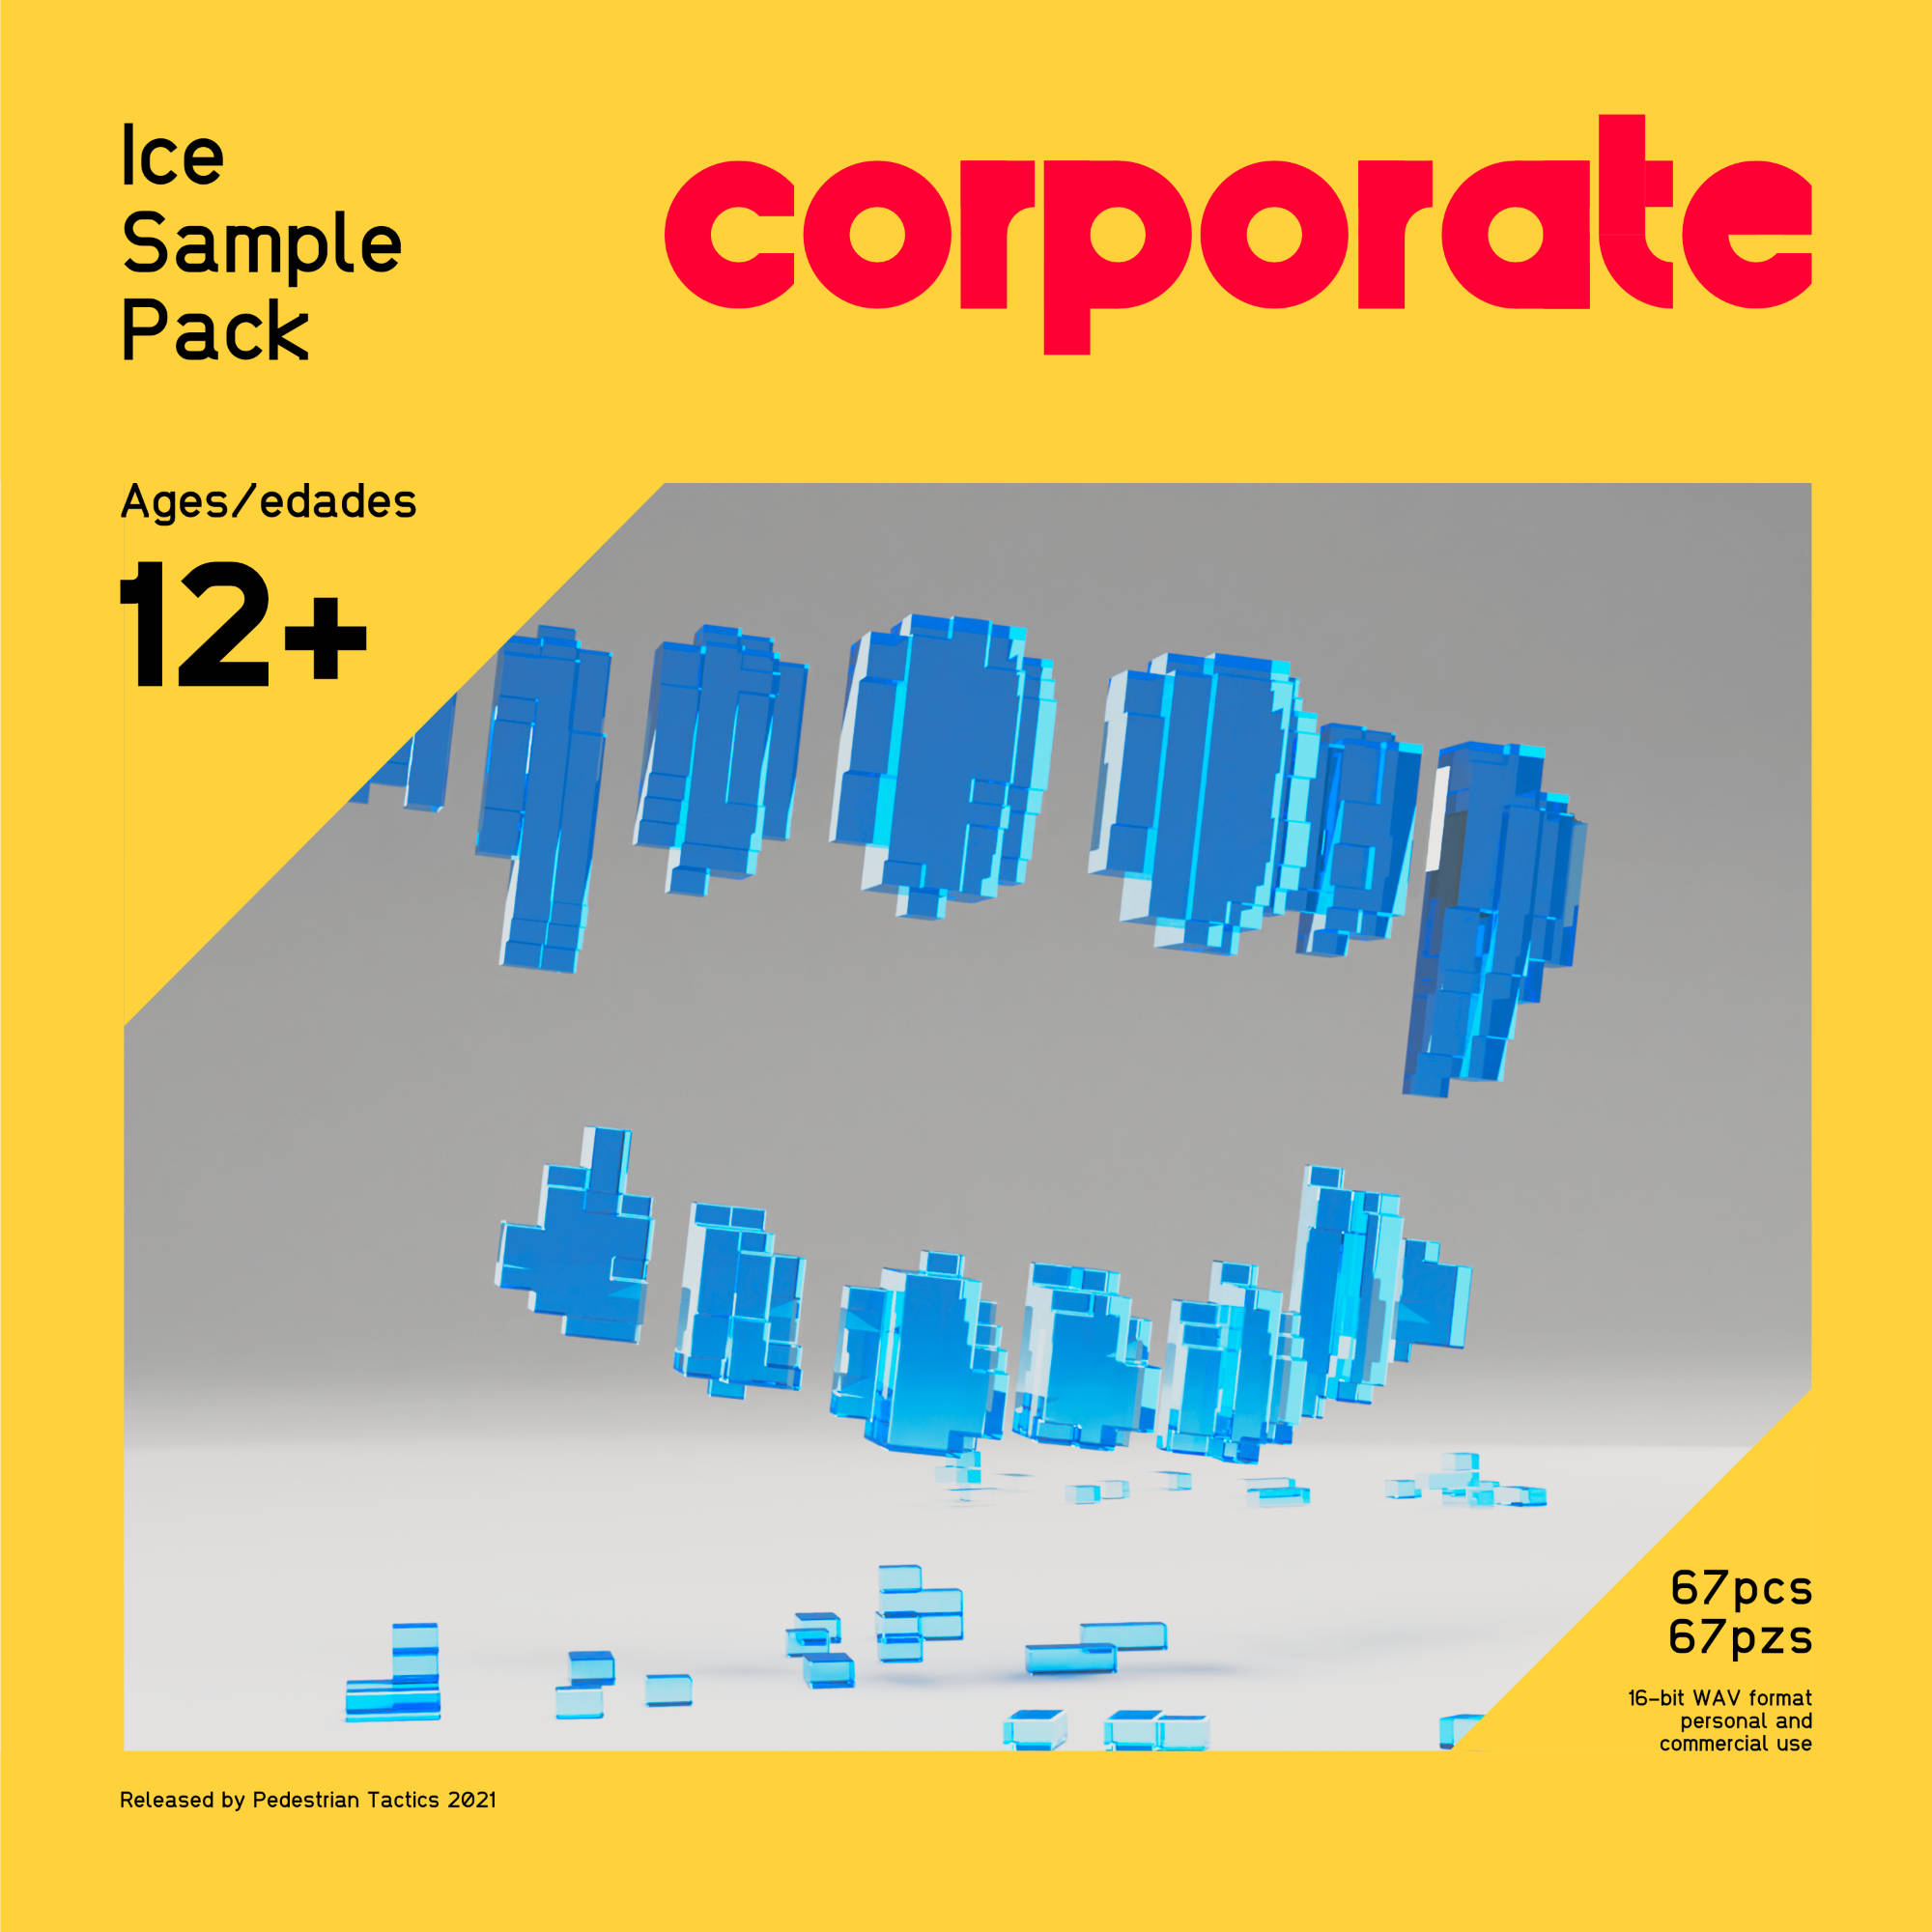 Corporate - Ice Sample Pack